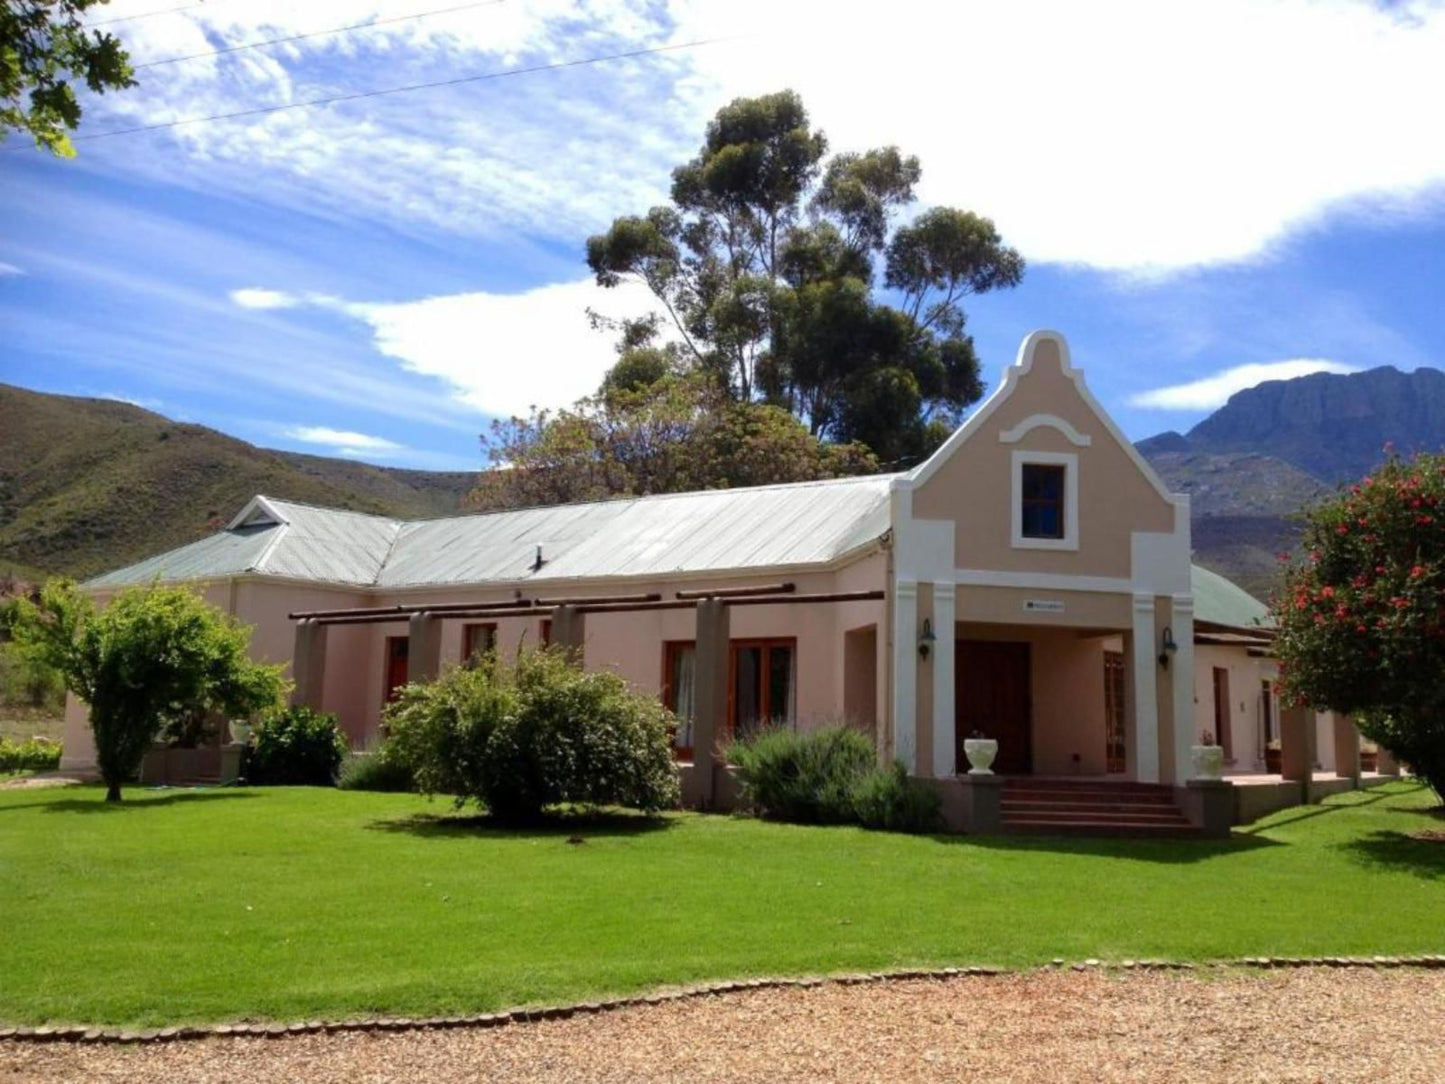 Oaksrest Vineyards Guest Farm Ladismith Western Cape South Africa Complementary Colors, House, Building, Architecture